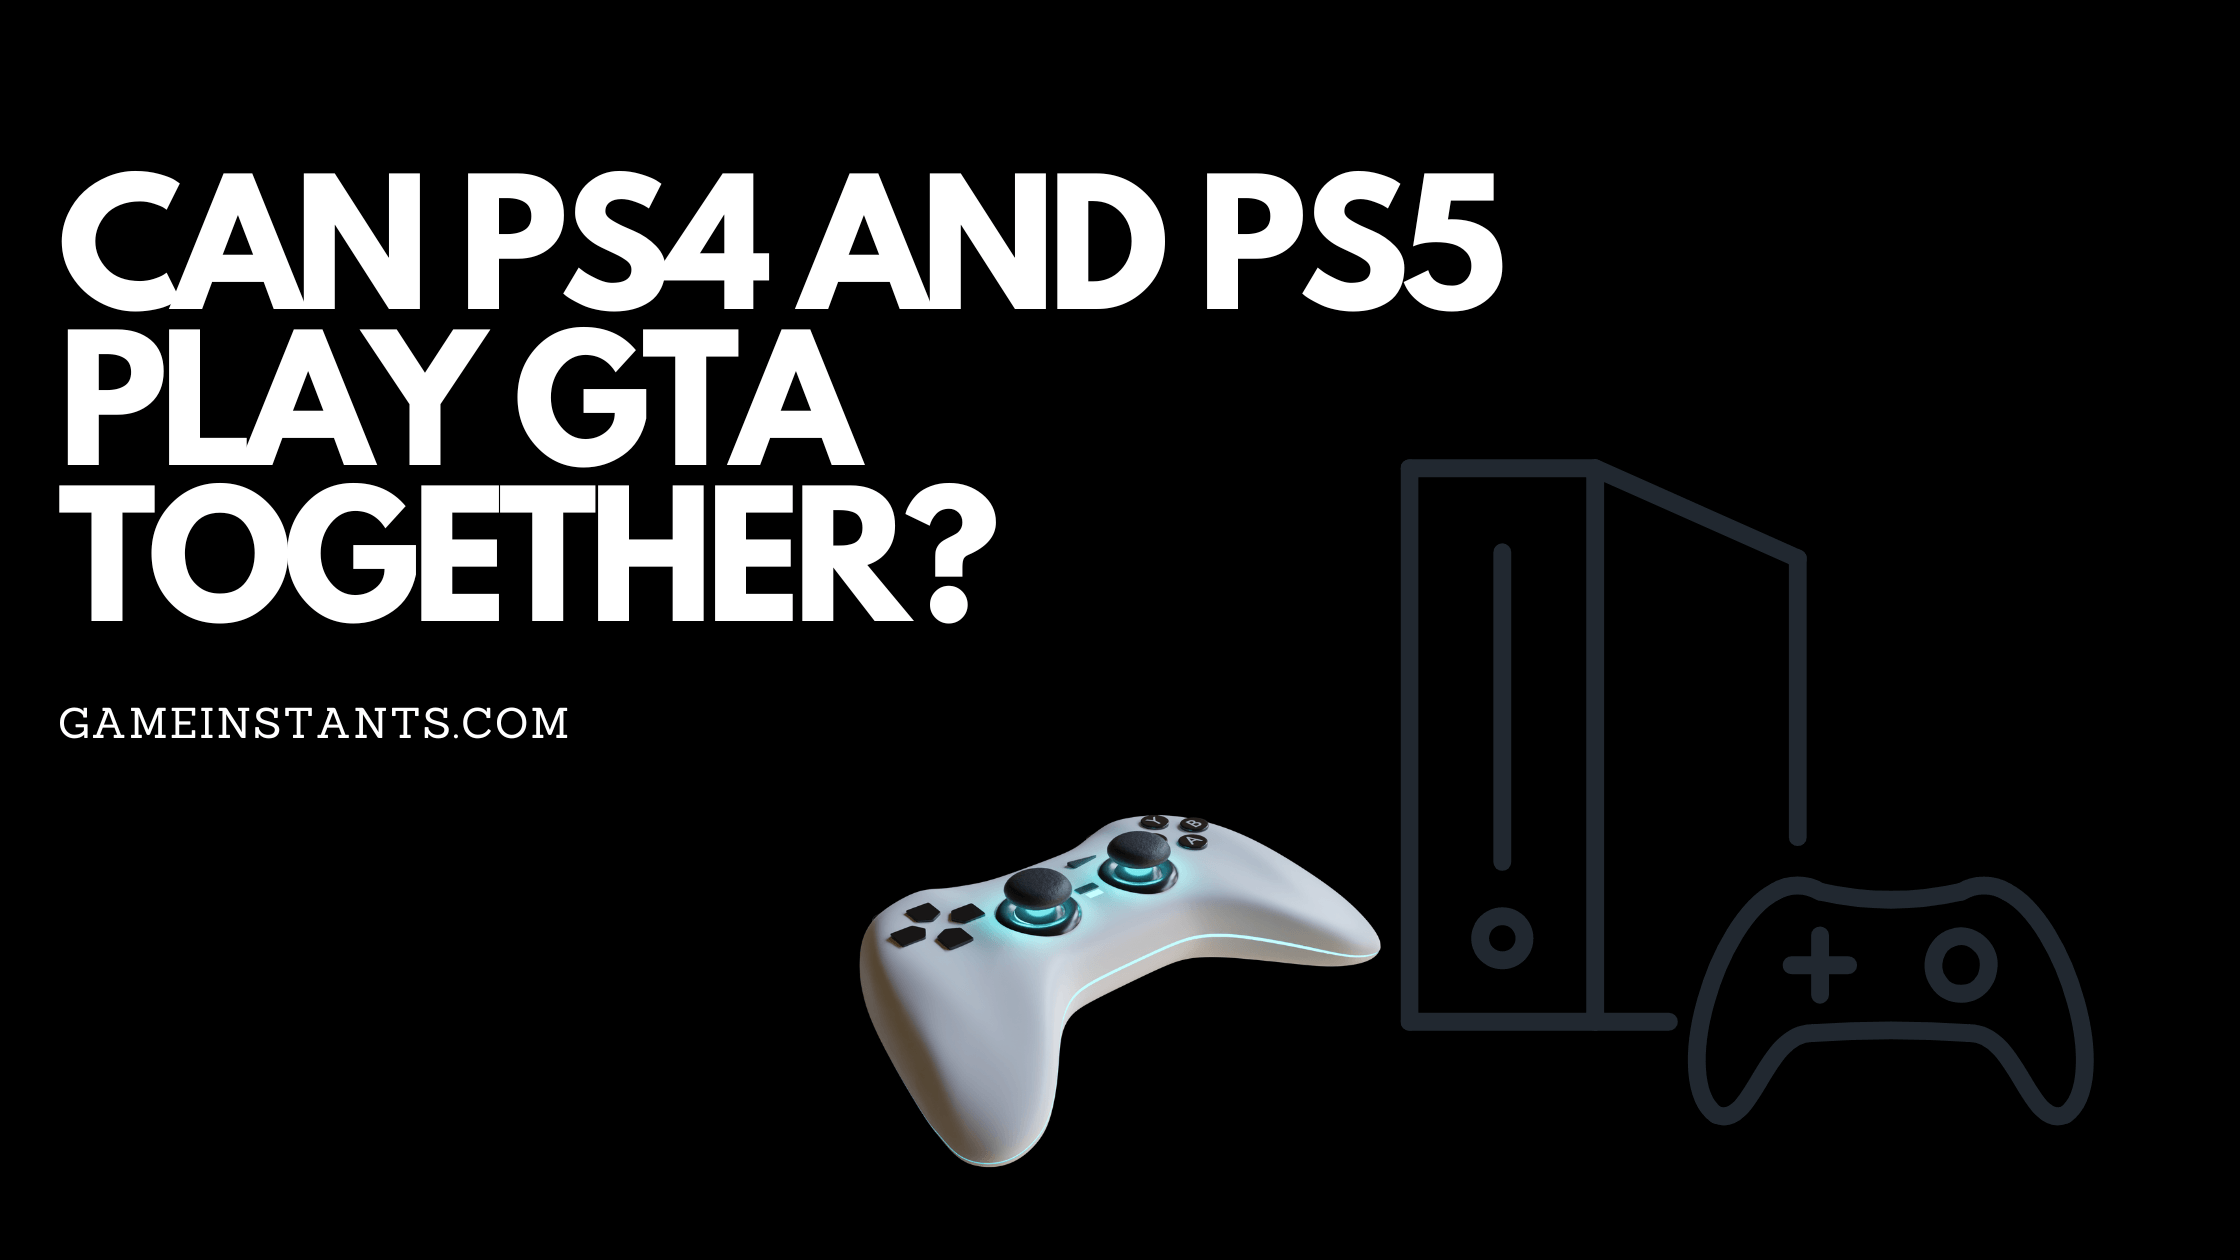 Can PS4 and PS5 Play GTA Together